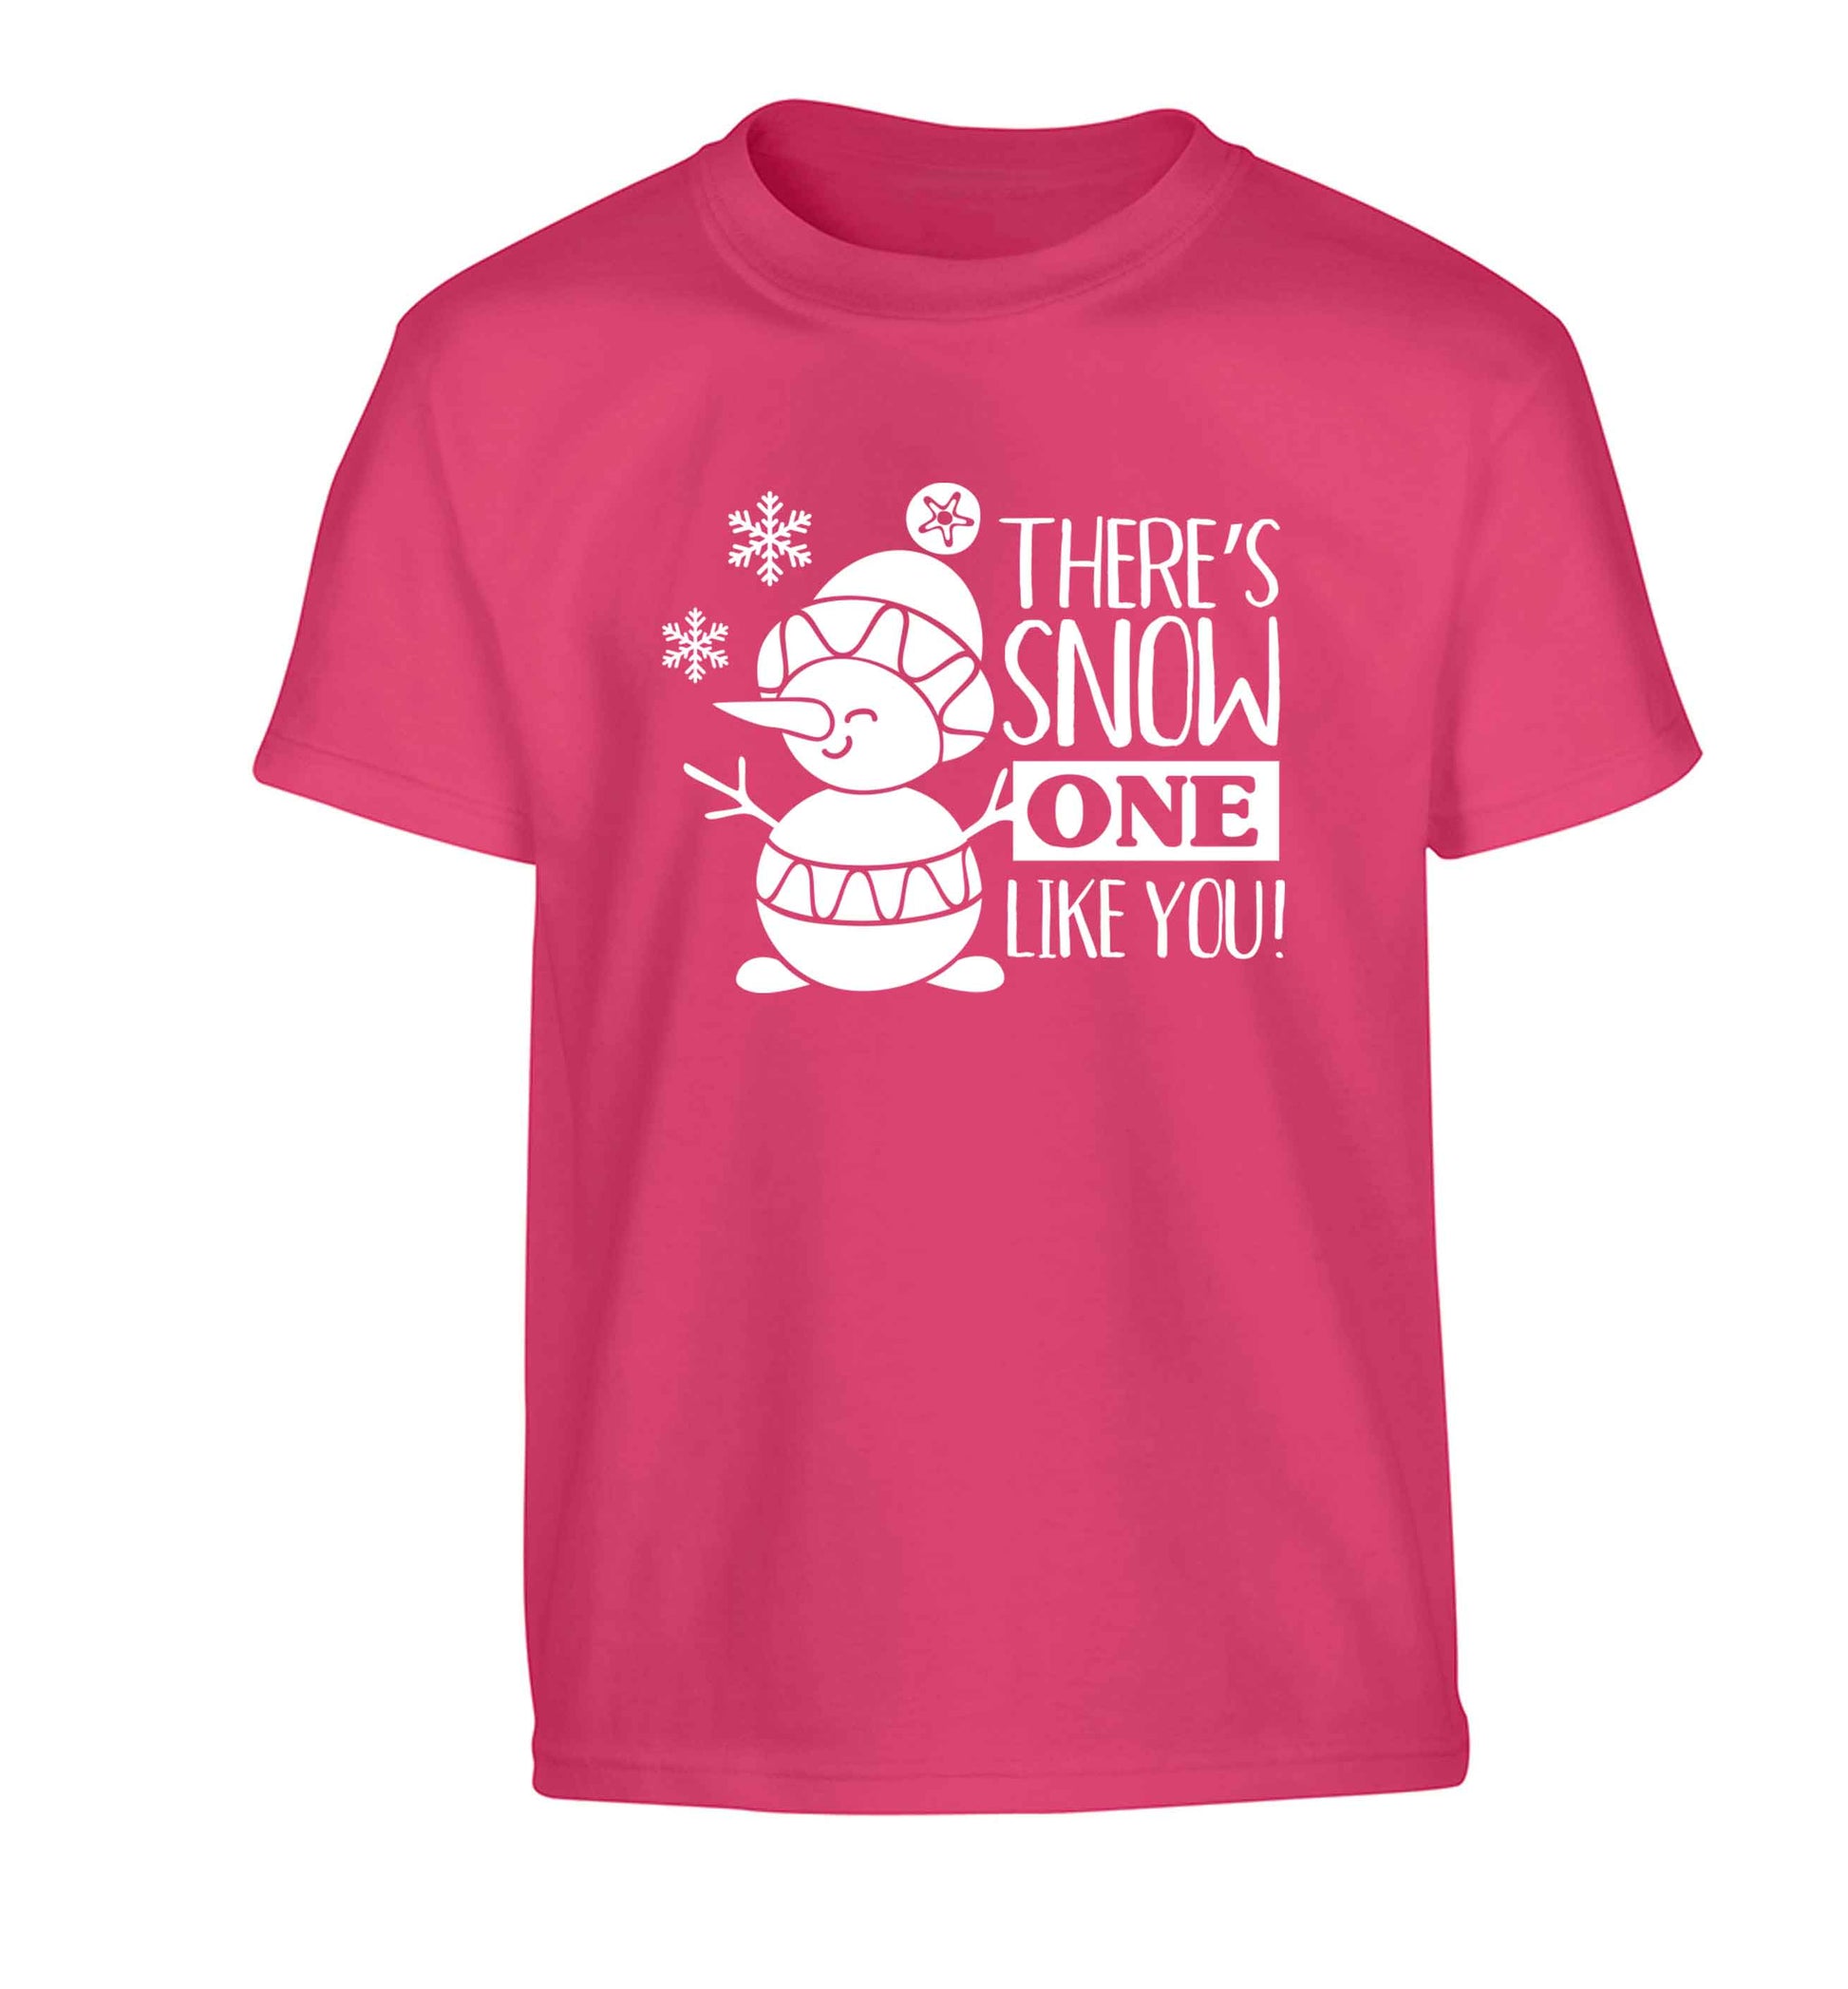 There's snow one like you Children's pink Tshirt 12-13 Years